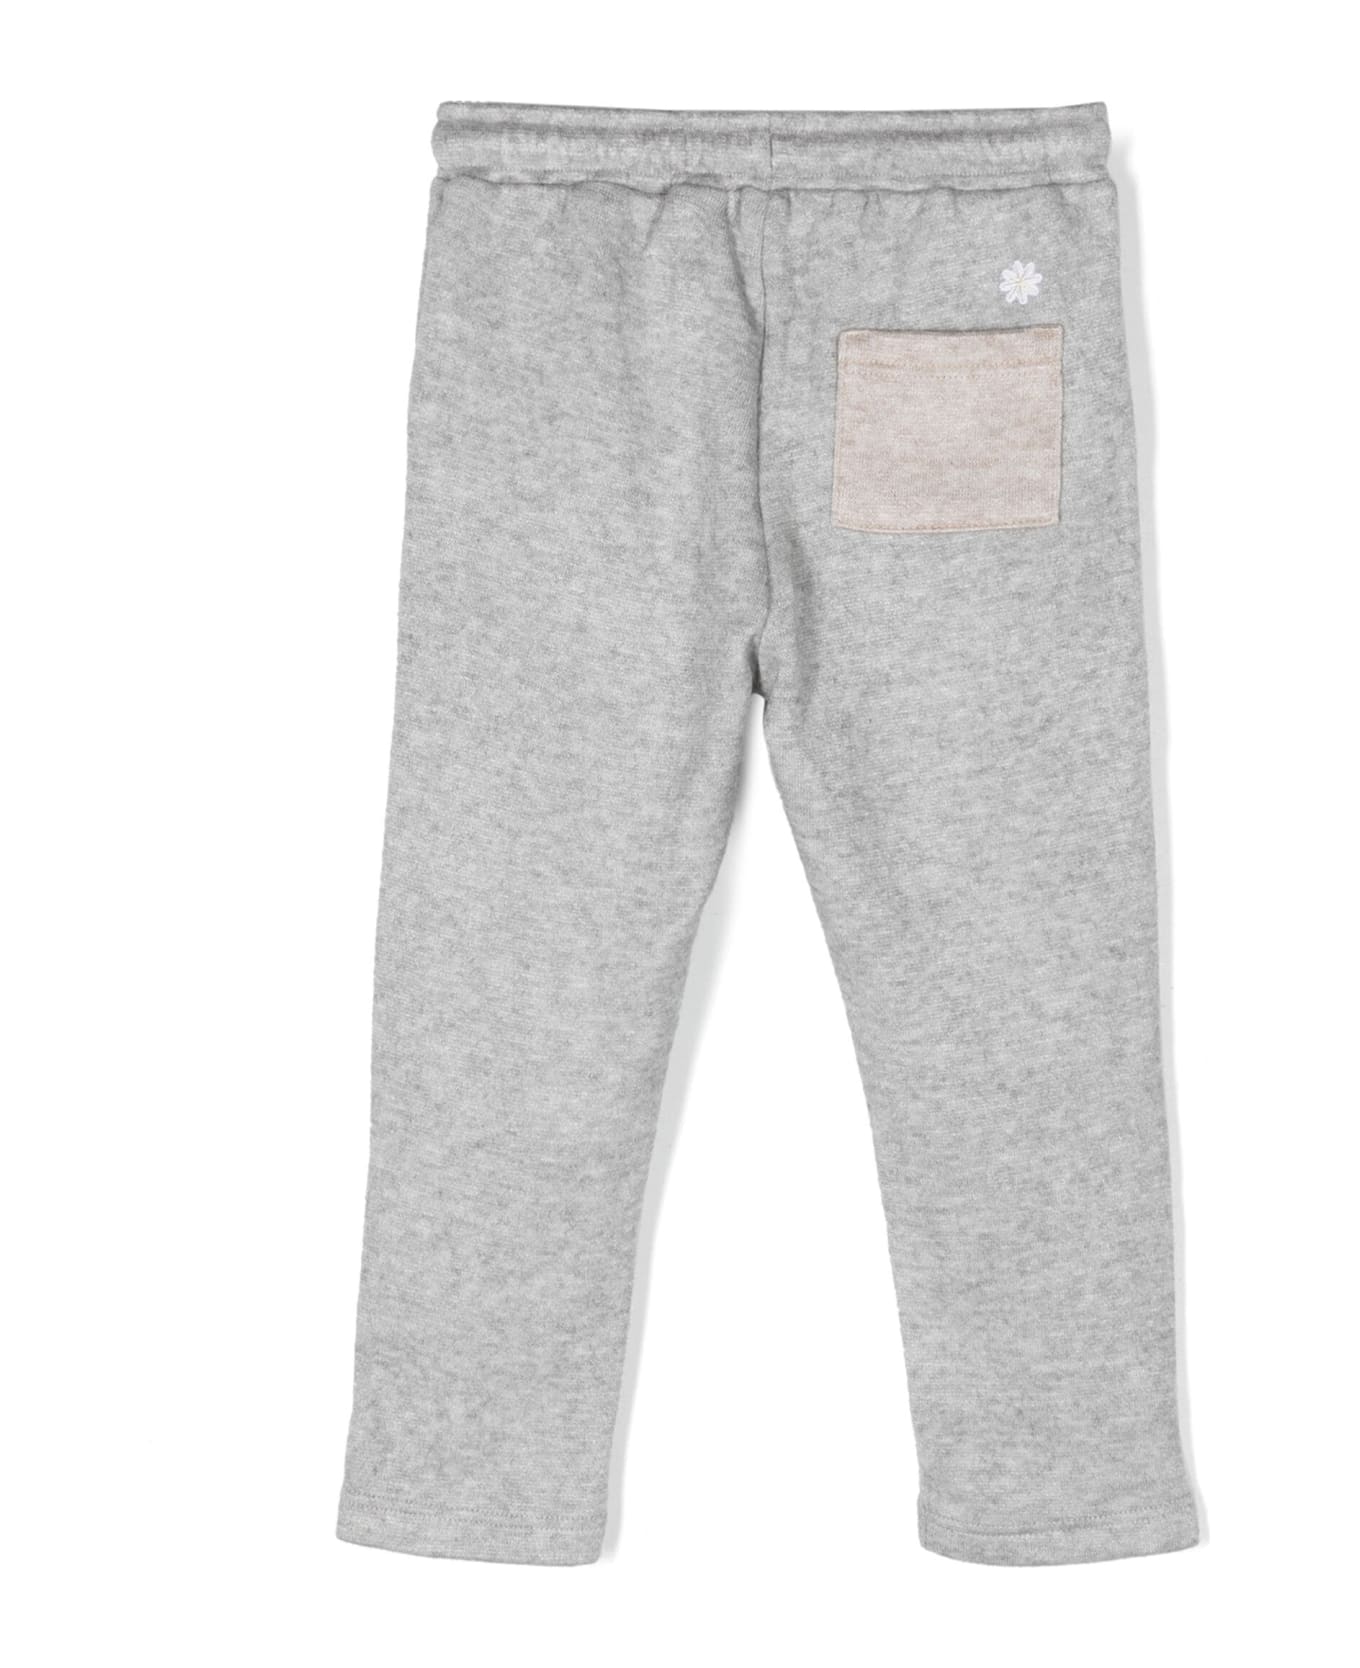 Manuel Ritz Sports Trousers With Embroidery - Gray